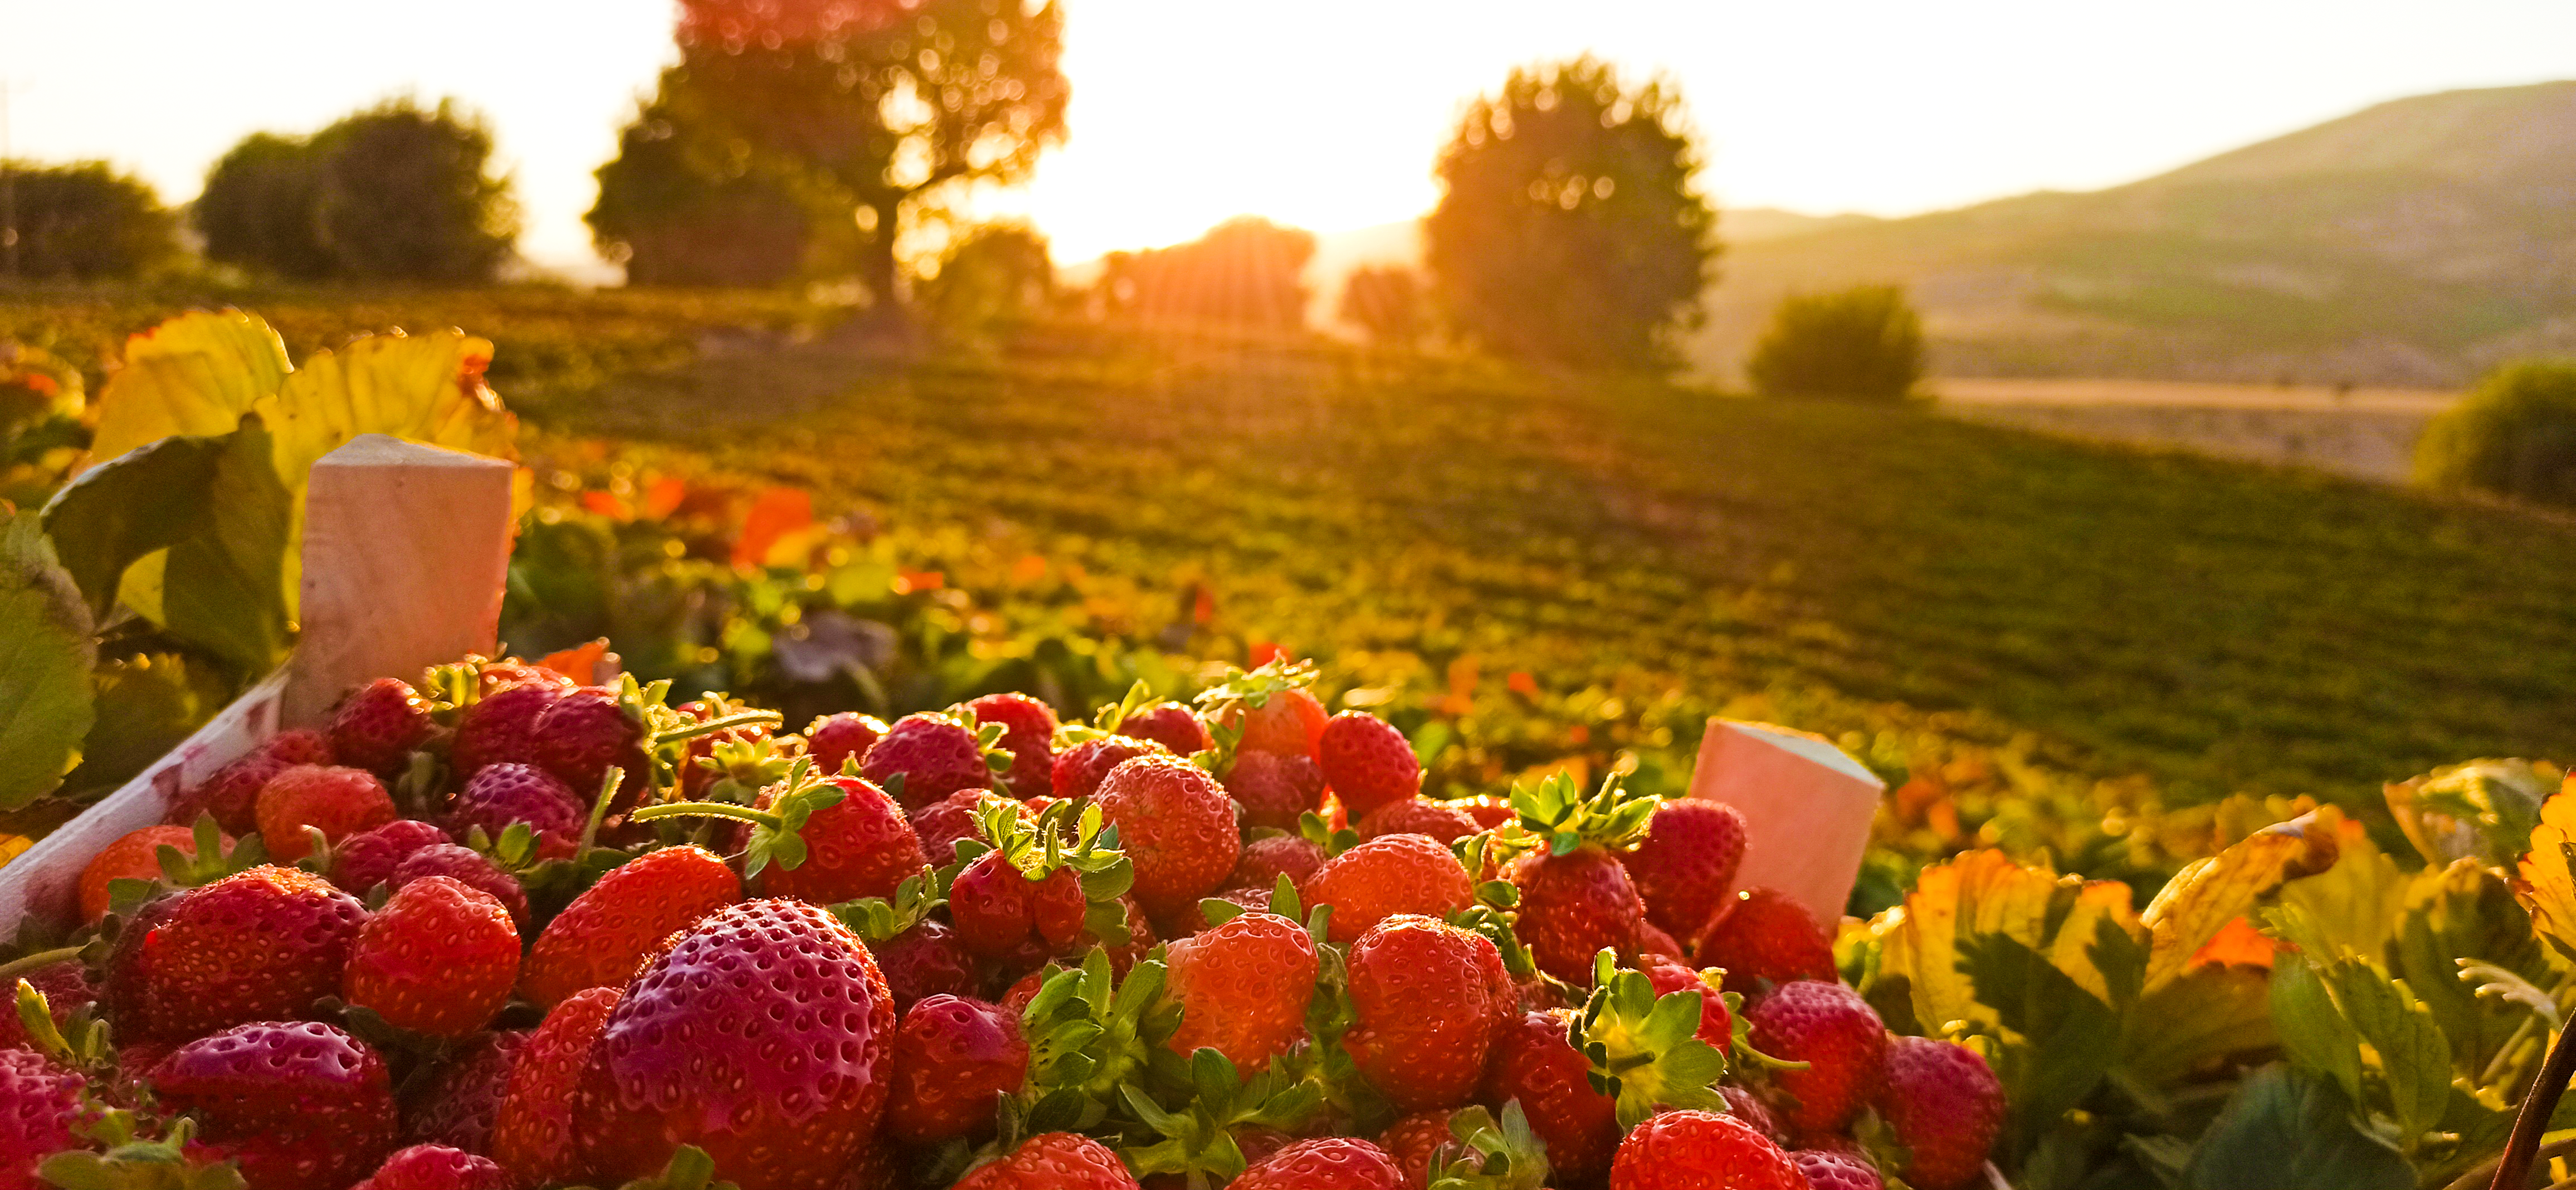 Strawberries Nature Plants Fruit Field Sunlight Trees Leaves Closeup Blurred Blurry Background Sunse 4624x2136